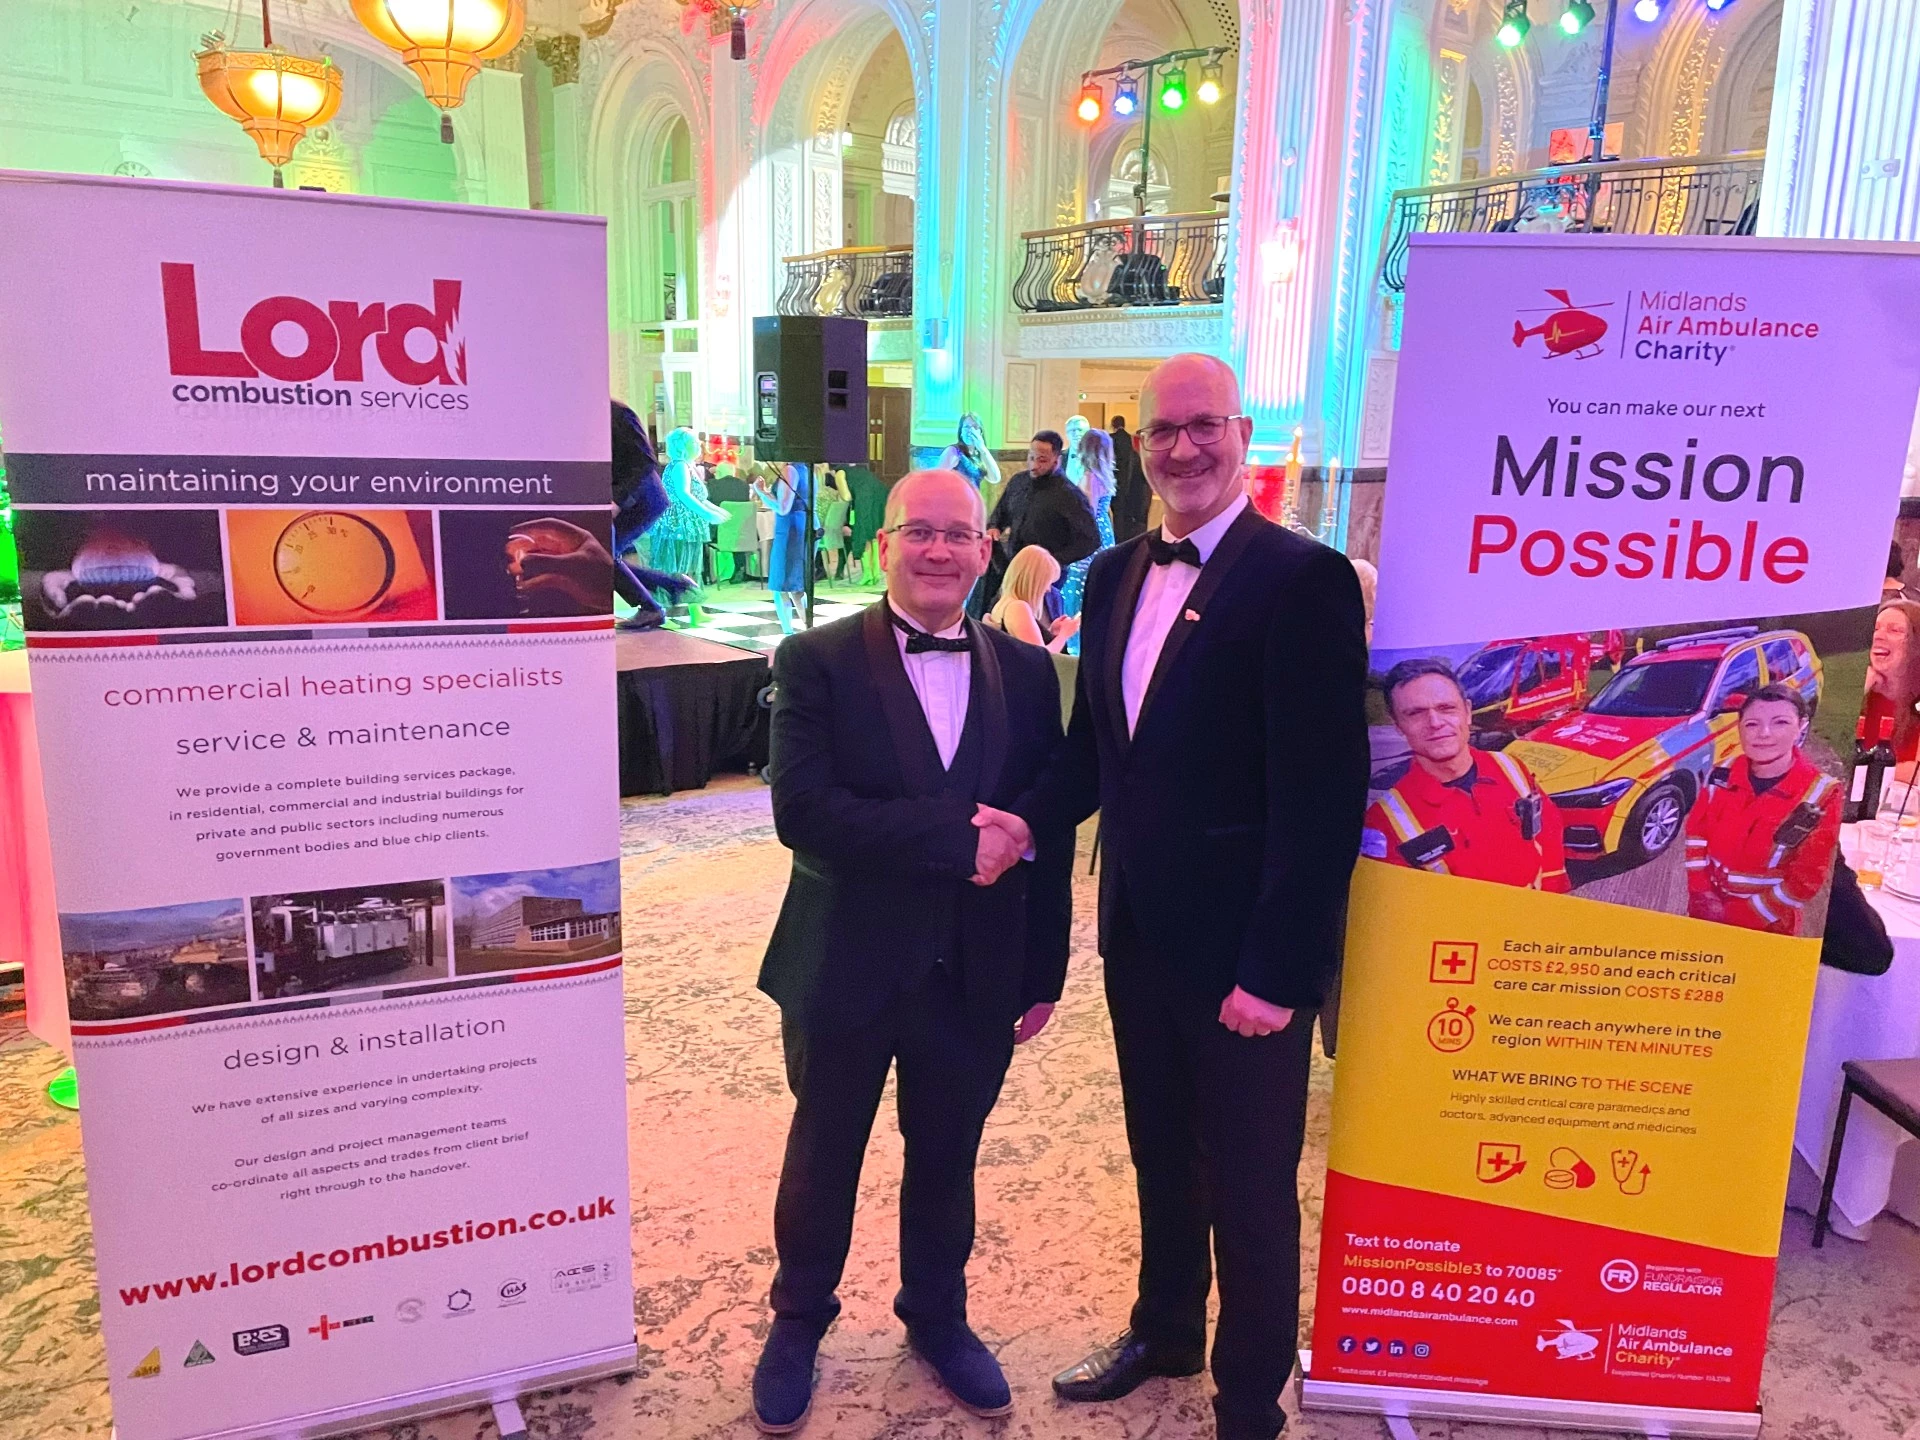 Lord MD Stuart Smith, left, with Jon Cottrell Midlands Air Ambulance Charity